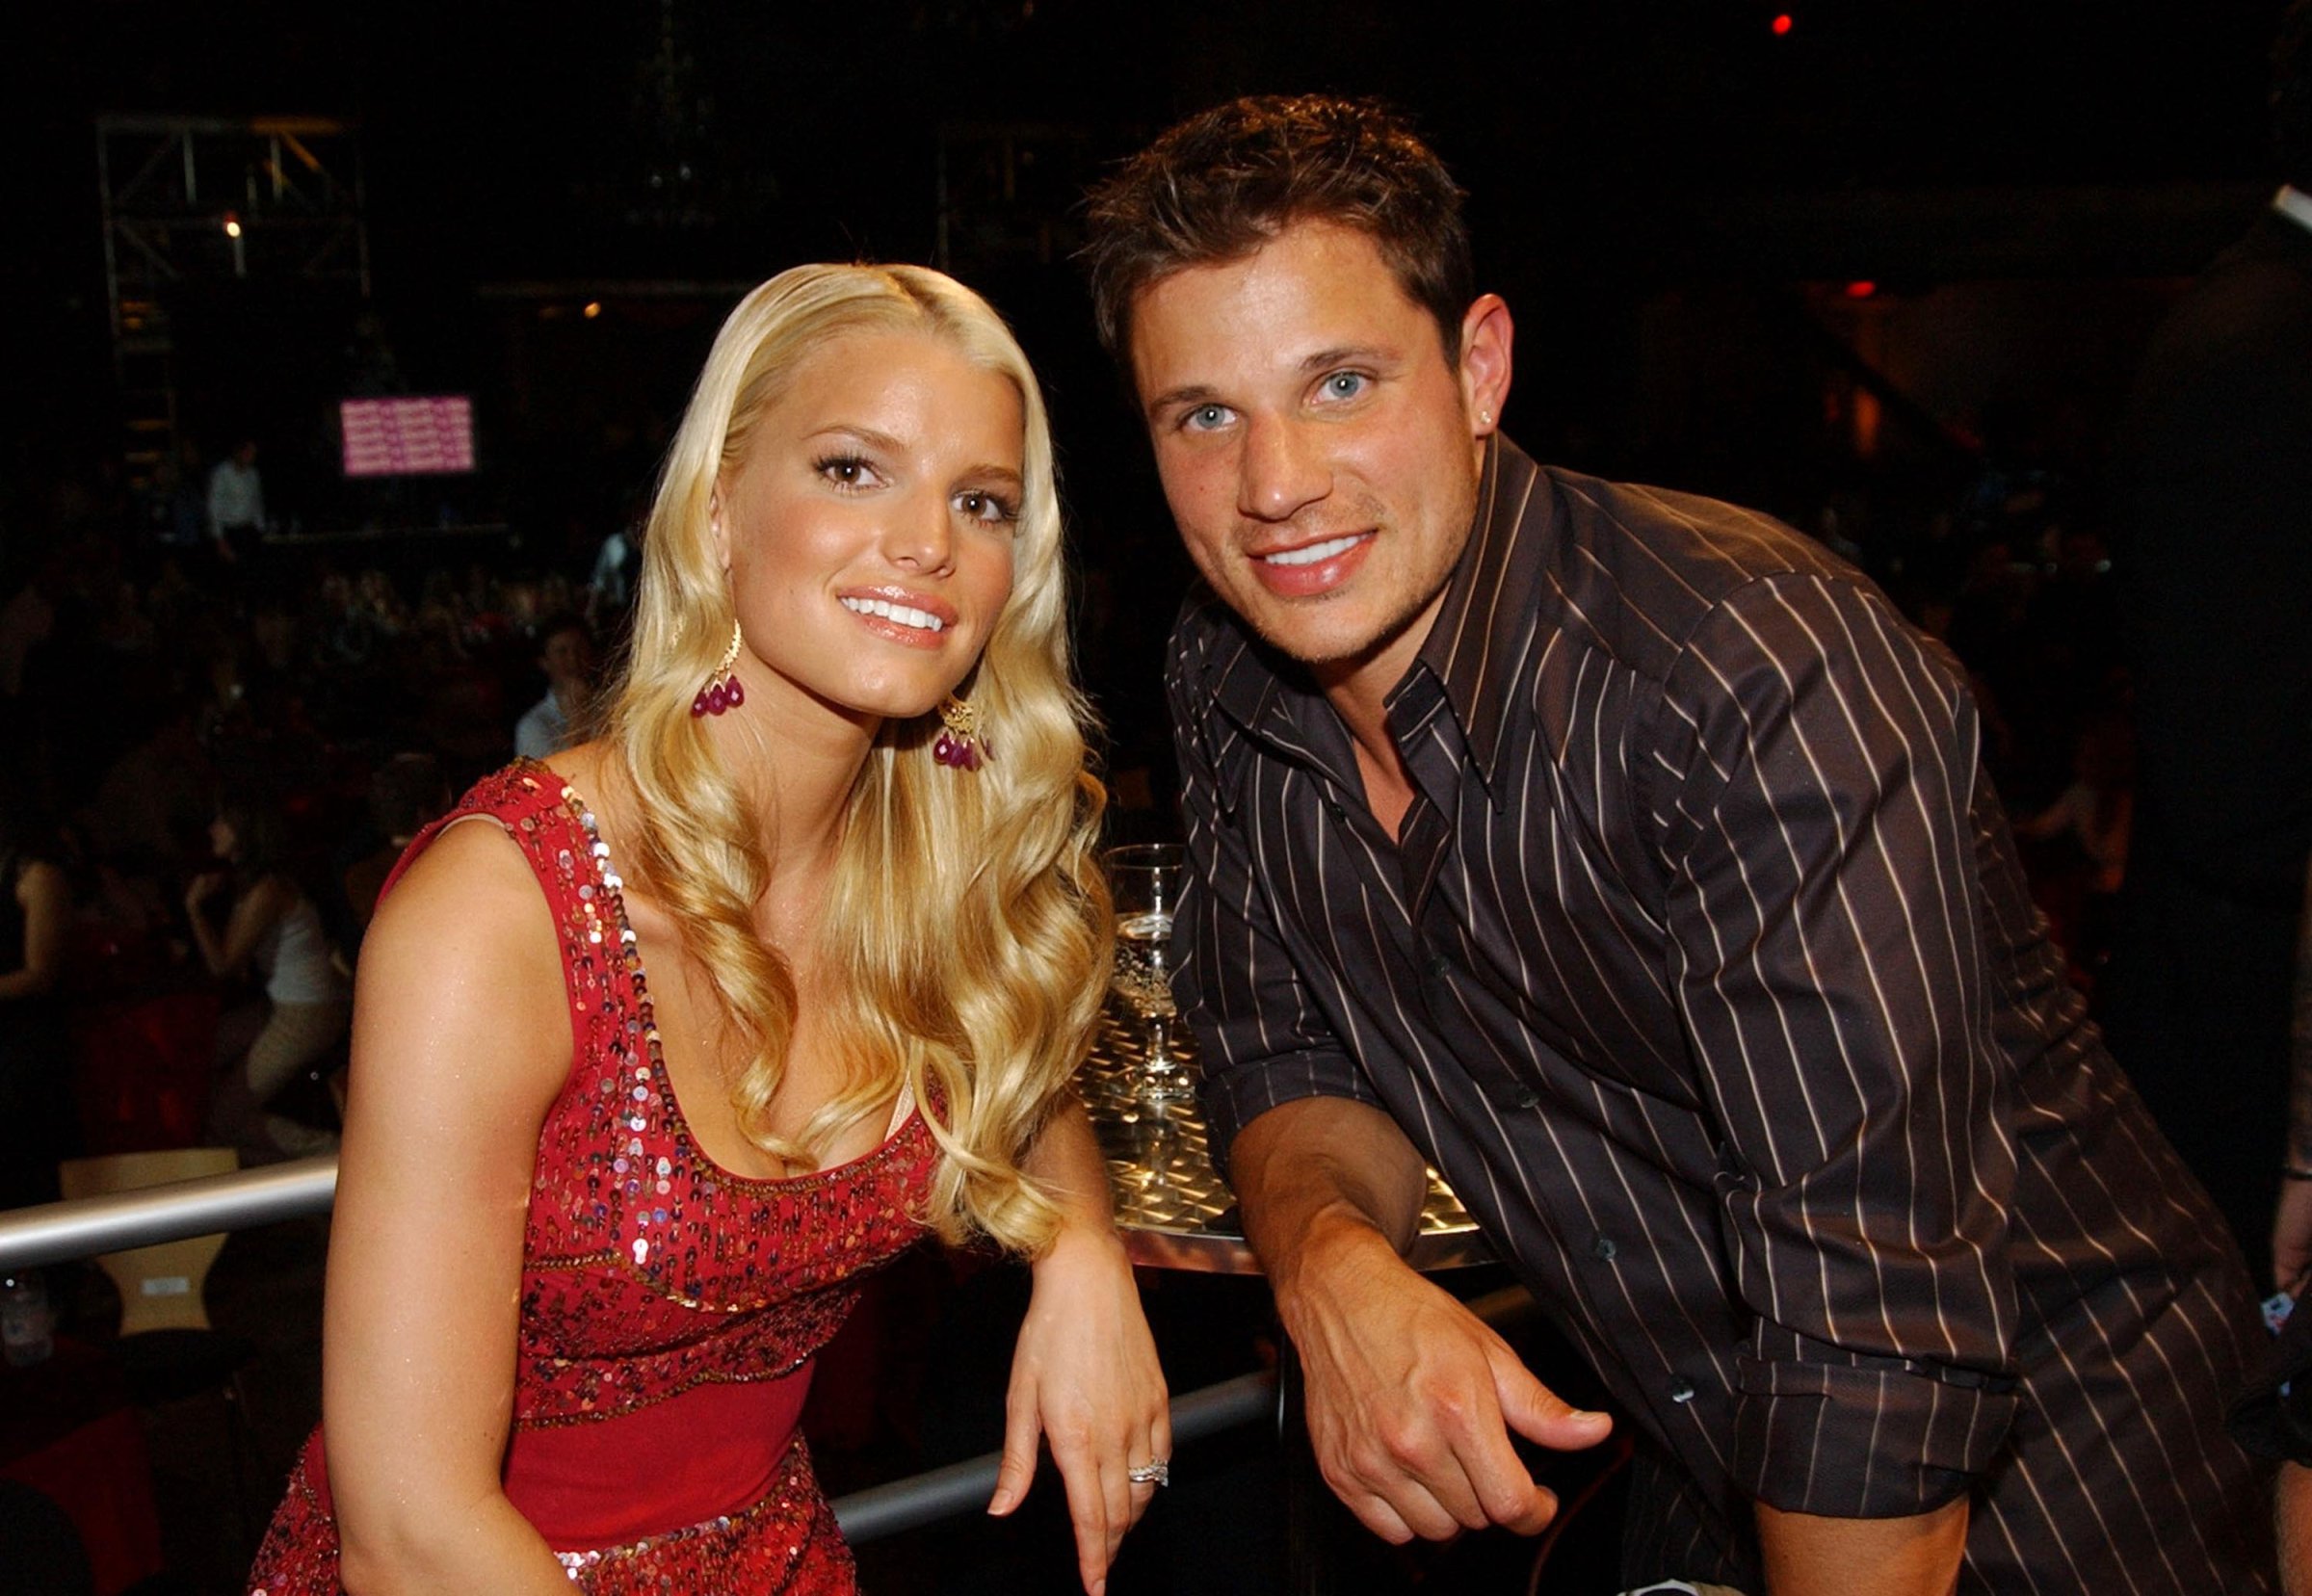 Jessica Simpson and Nick Lachey at MTV Bash - Backstage and Audience in Hollywood on June 28, 2003.